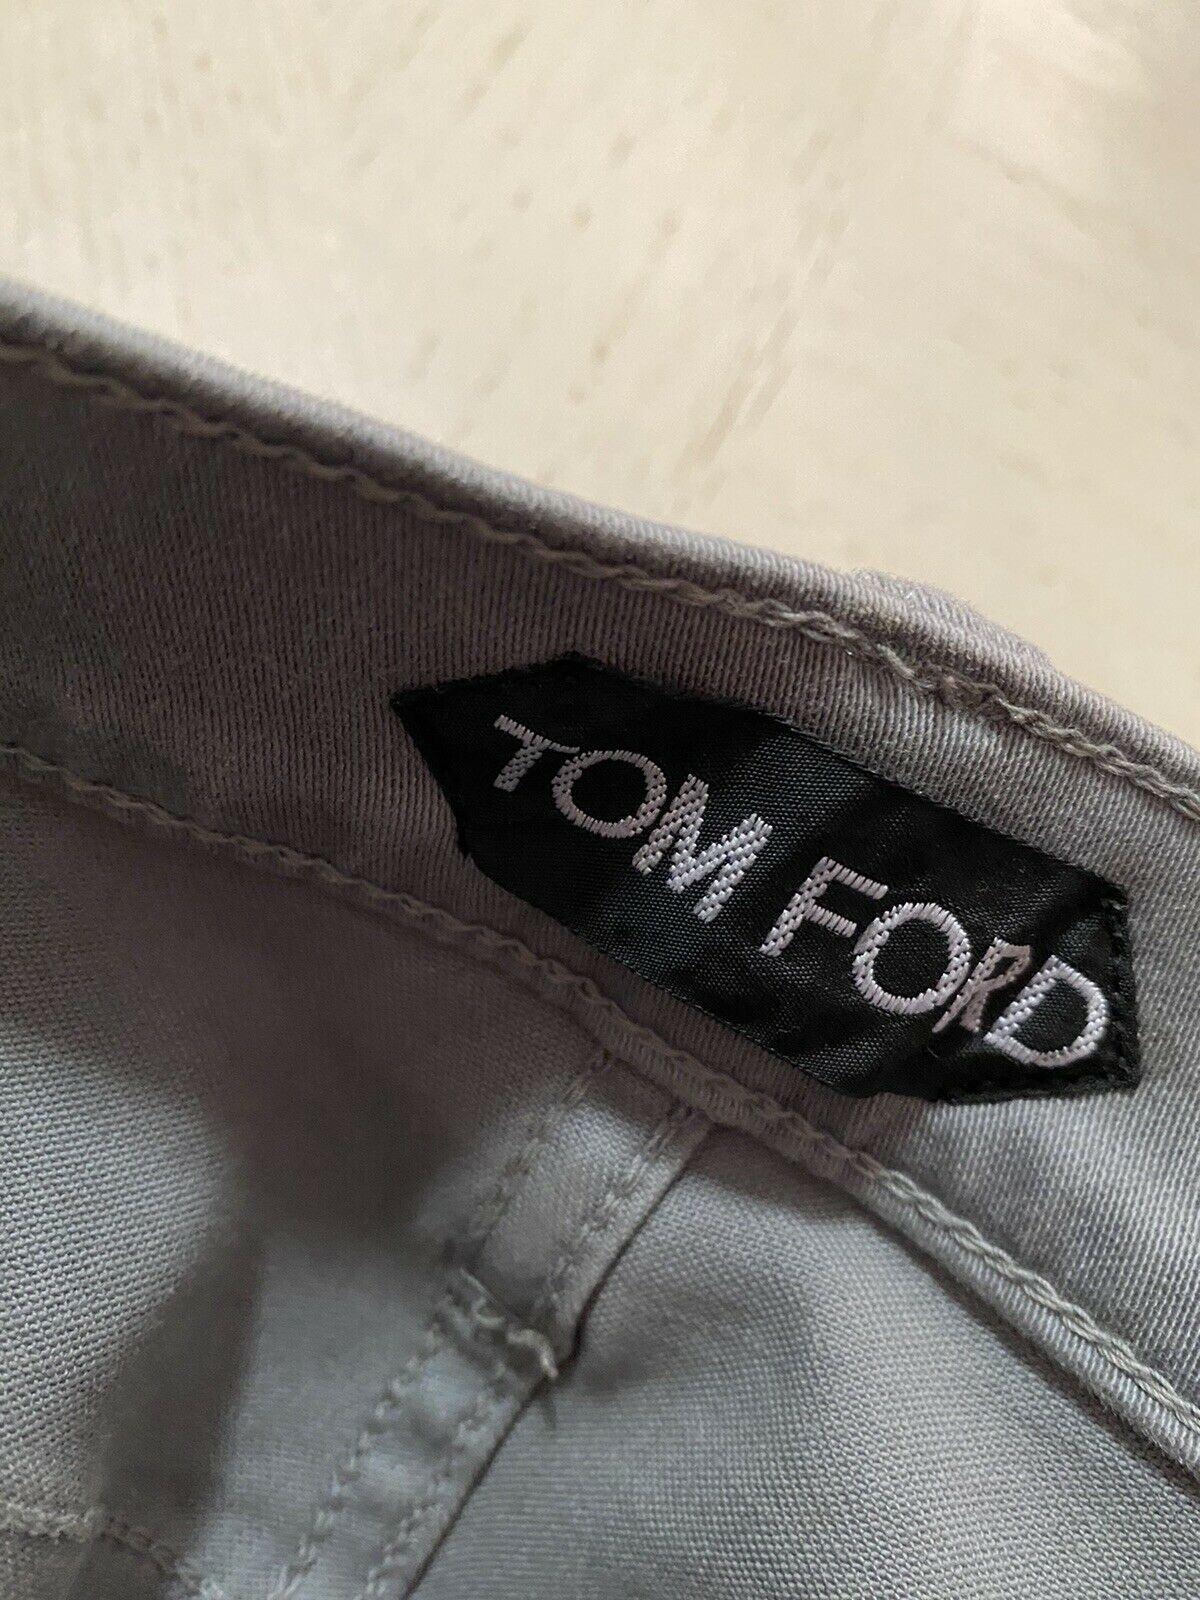 $695 Tom Ford Mens Slim Fit Jeans Pants Green 33 US Made In USA